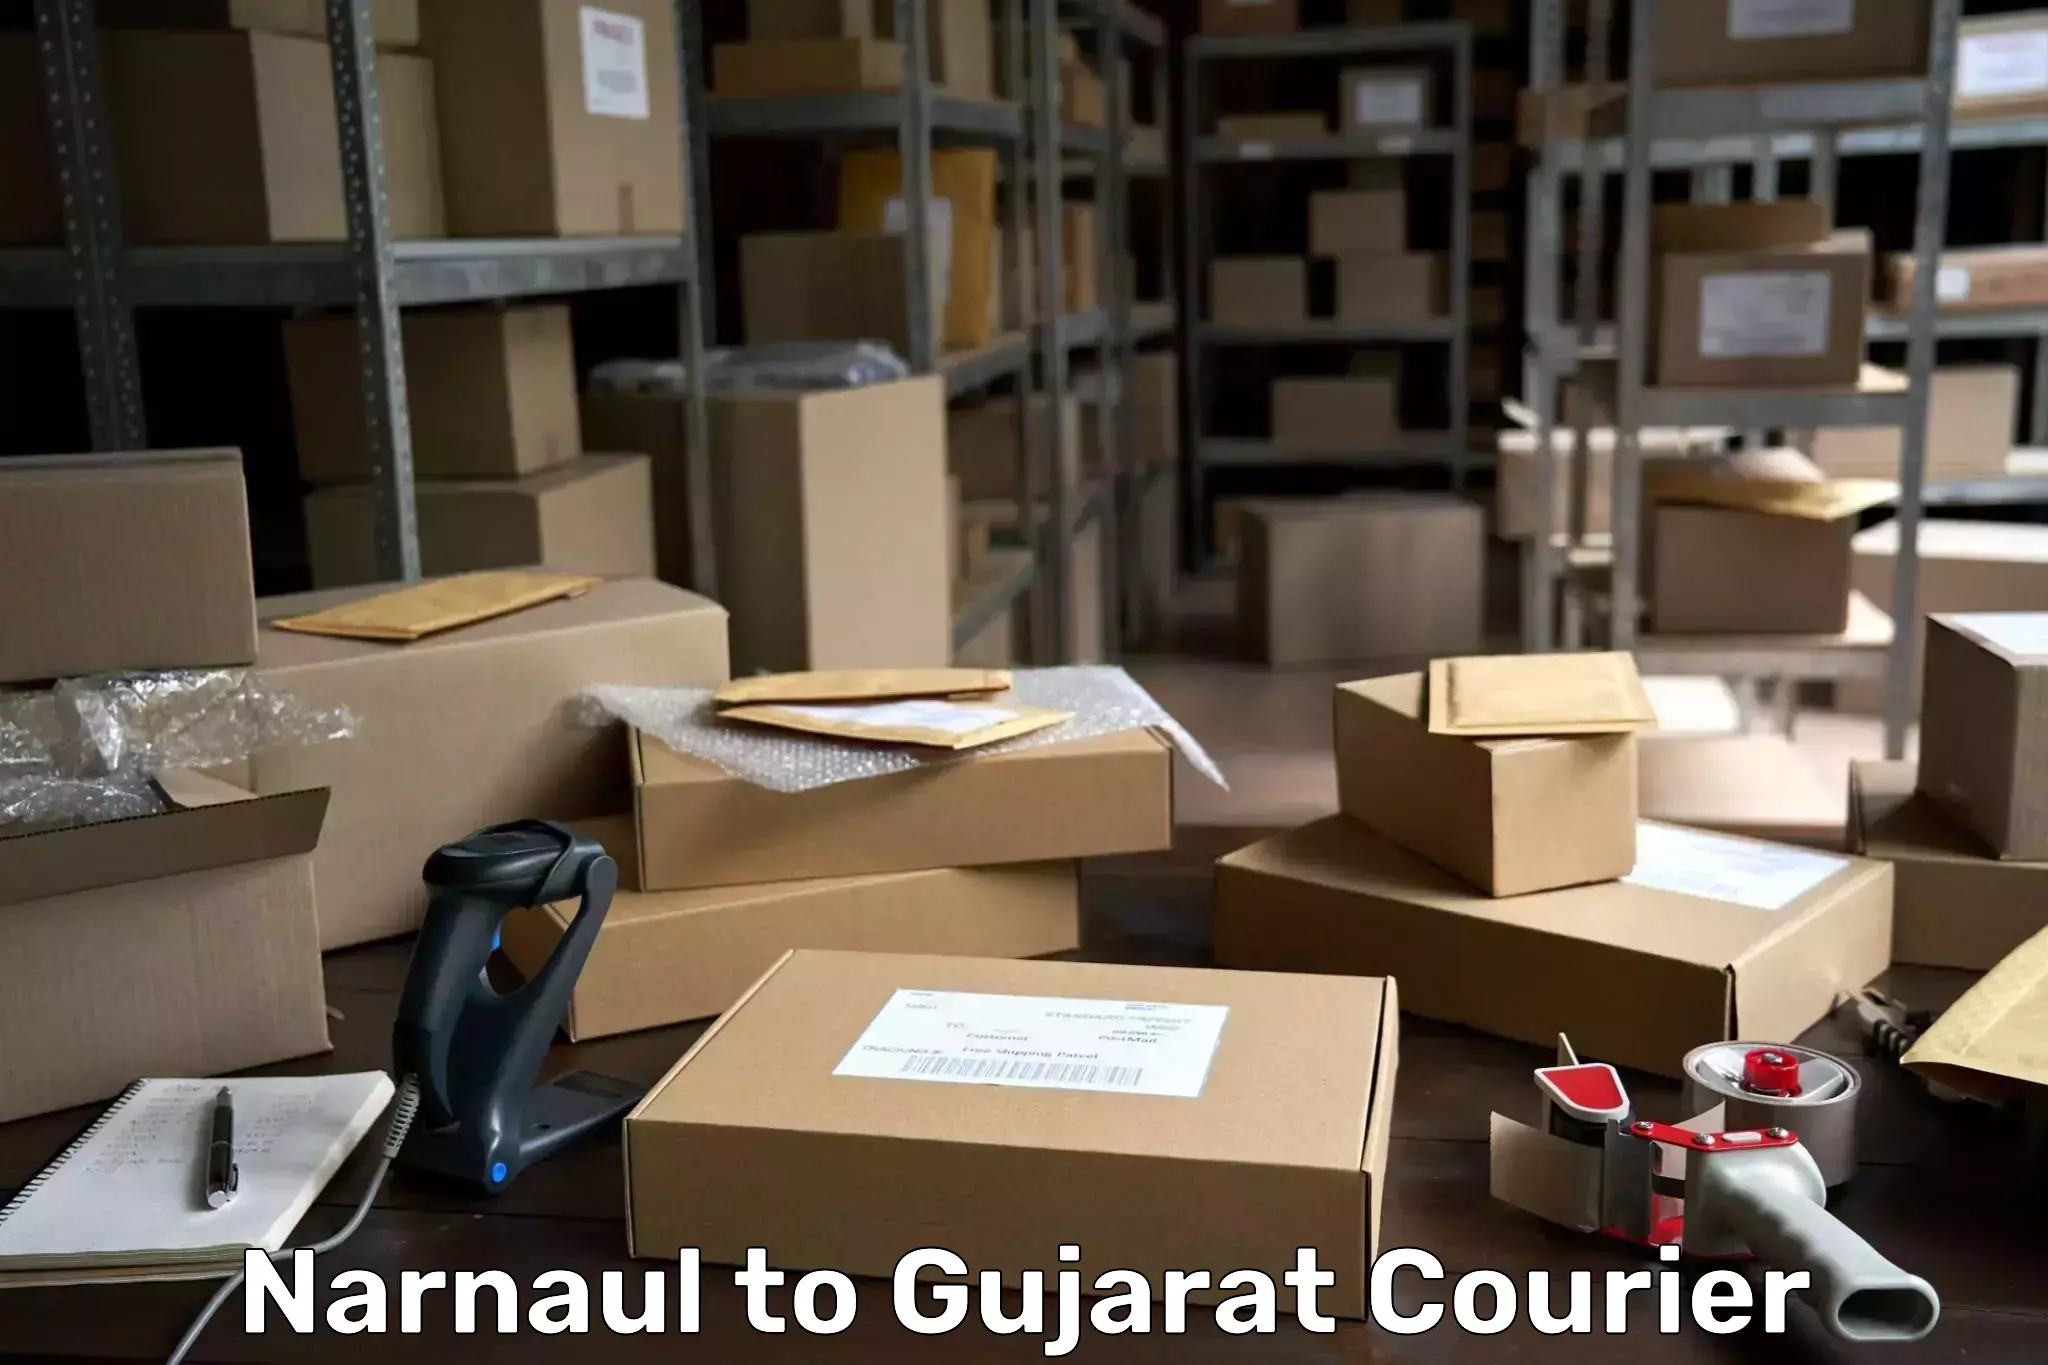 24-hour courier service Narnaul to Amreli